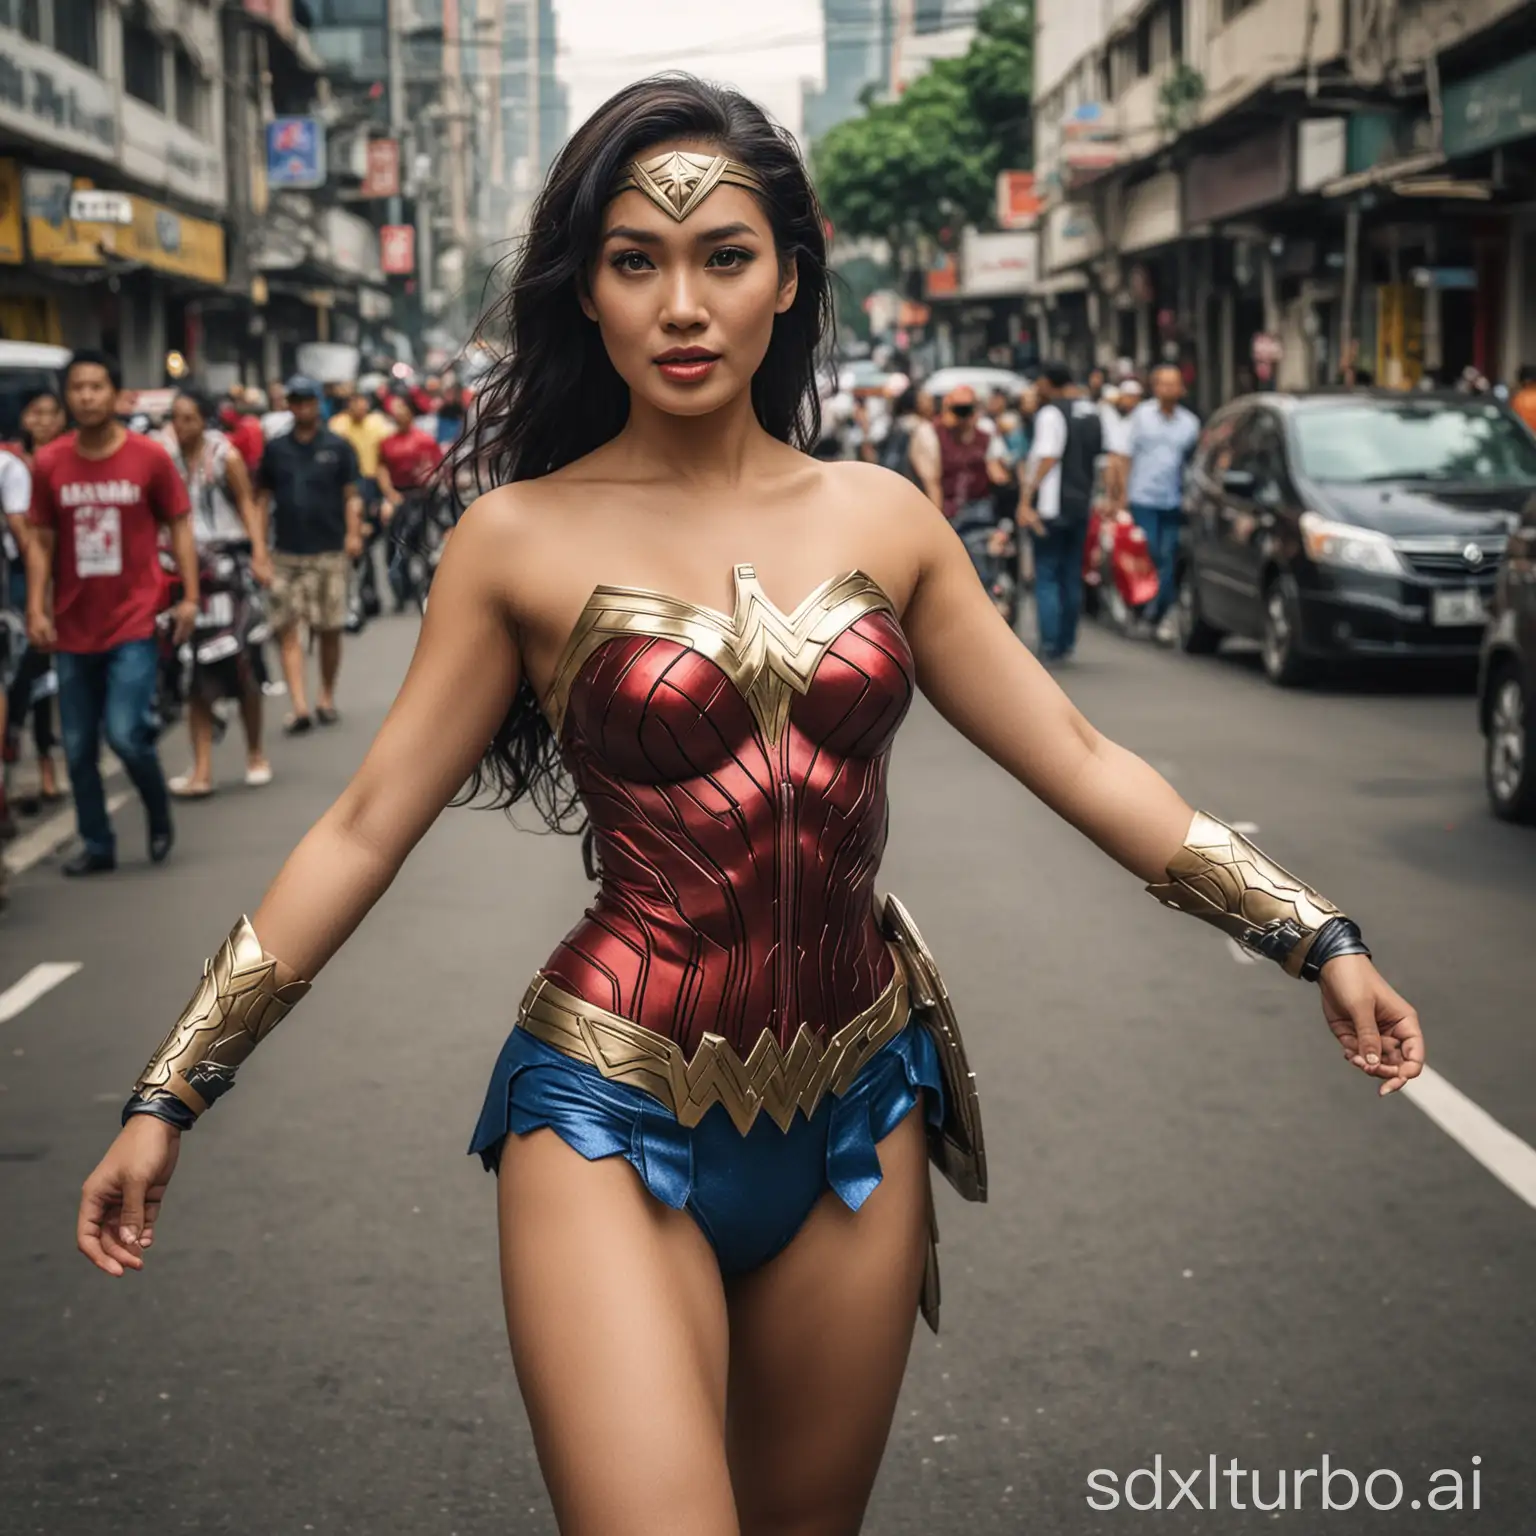 an indonesian beautiful woman in her 40 with wonder woman costum, in the middle of busy Jakarta streets